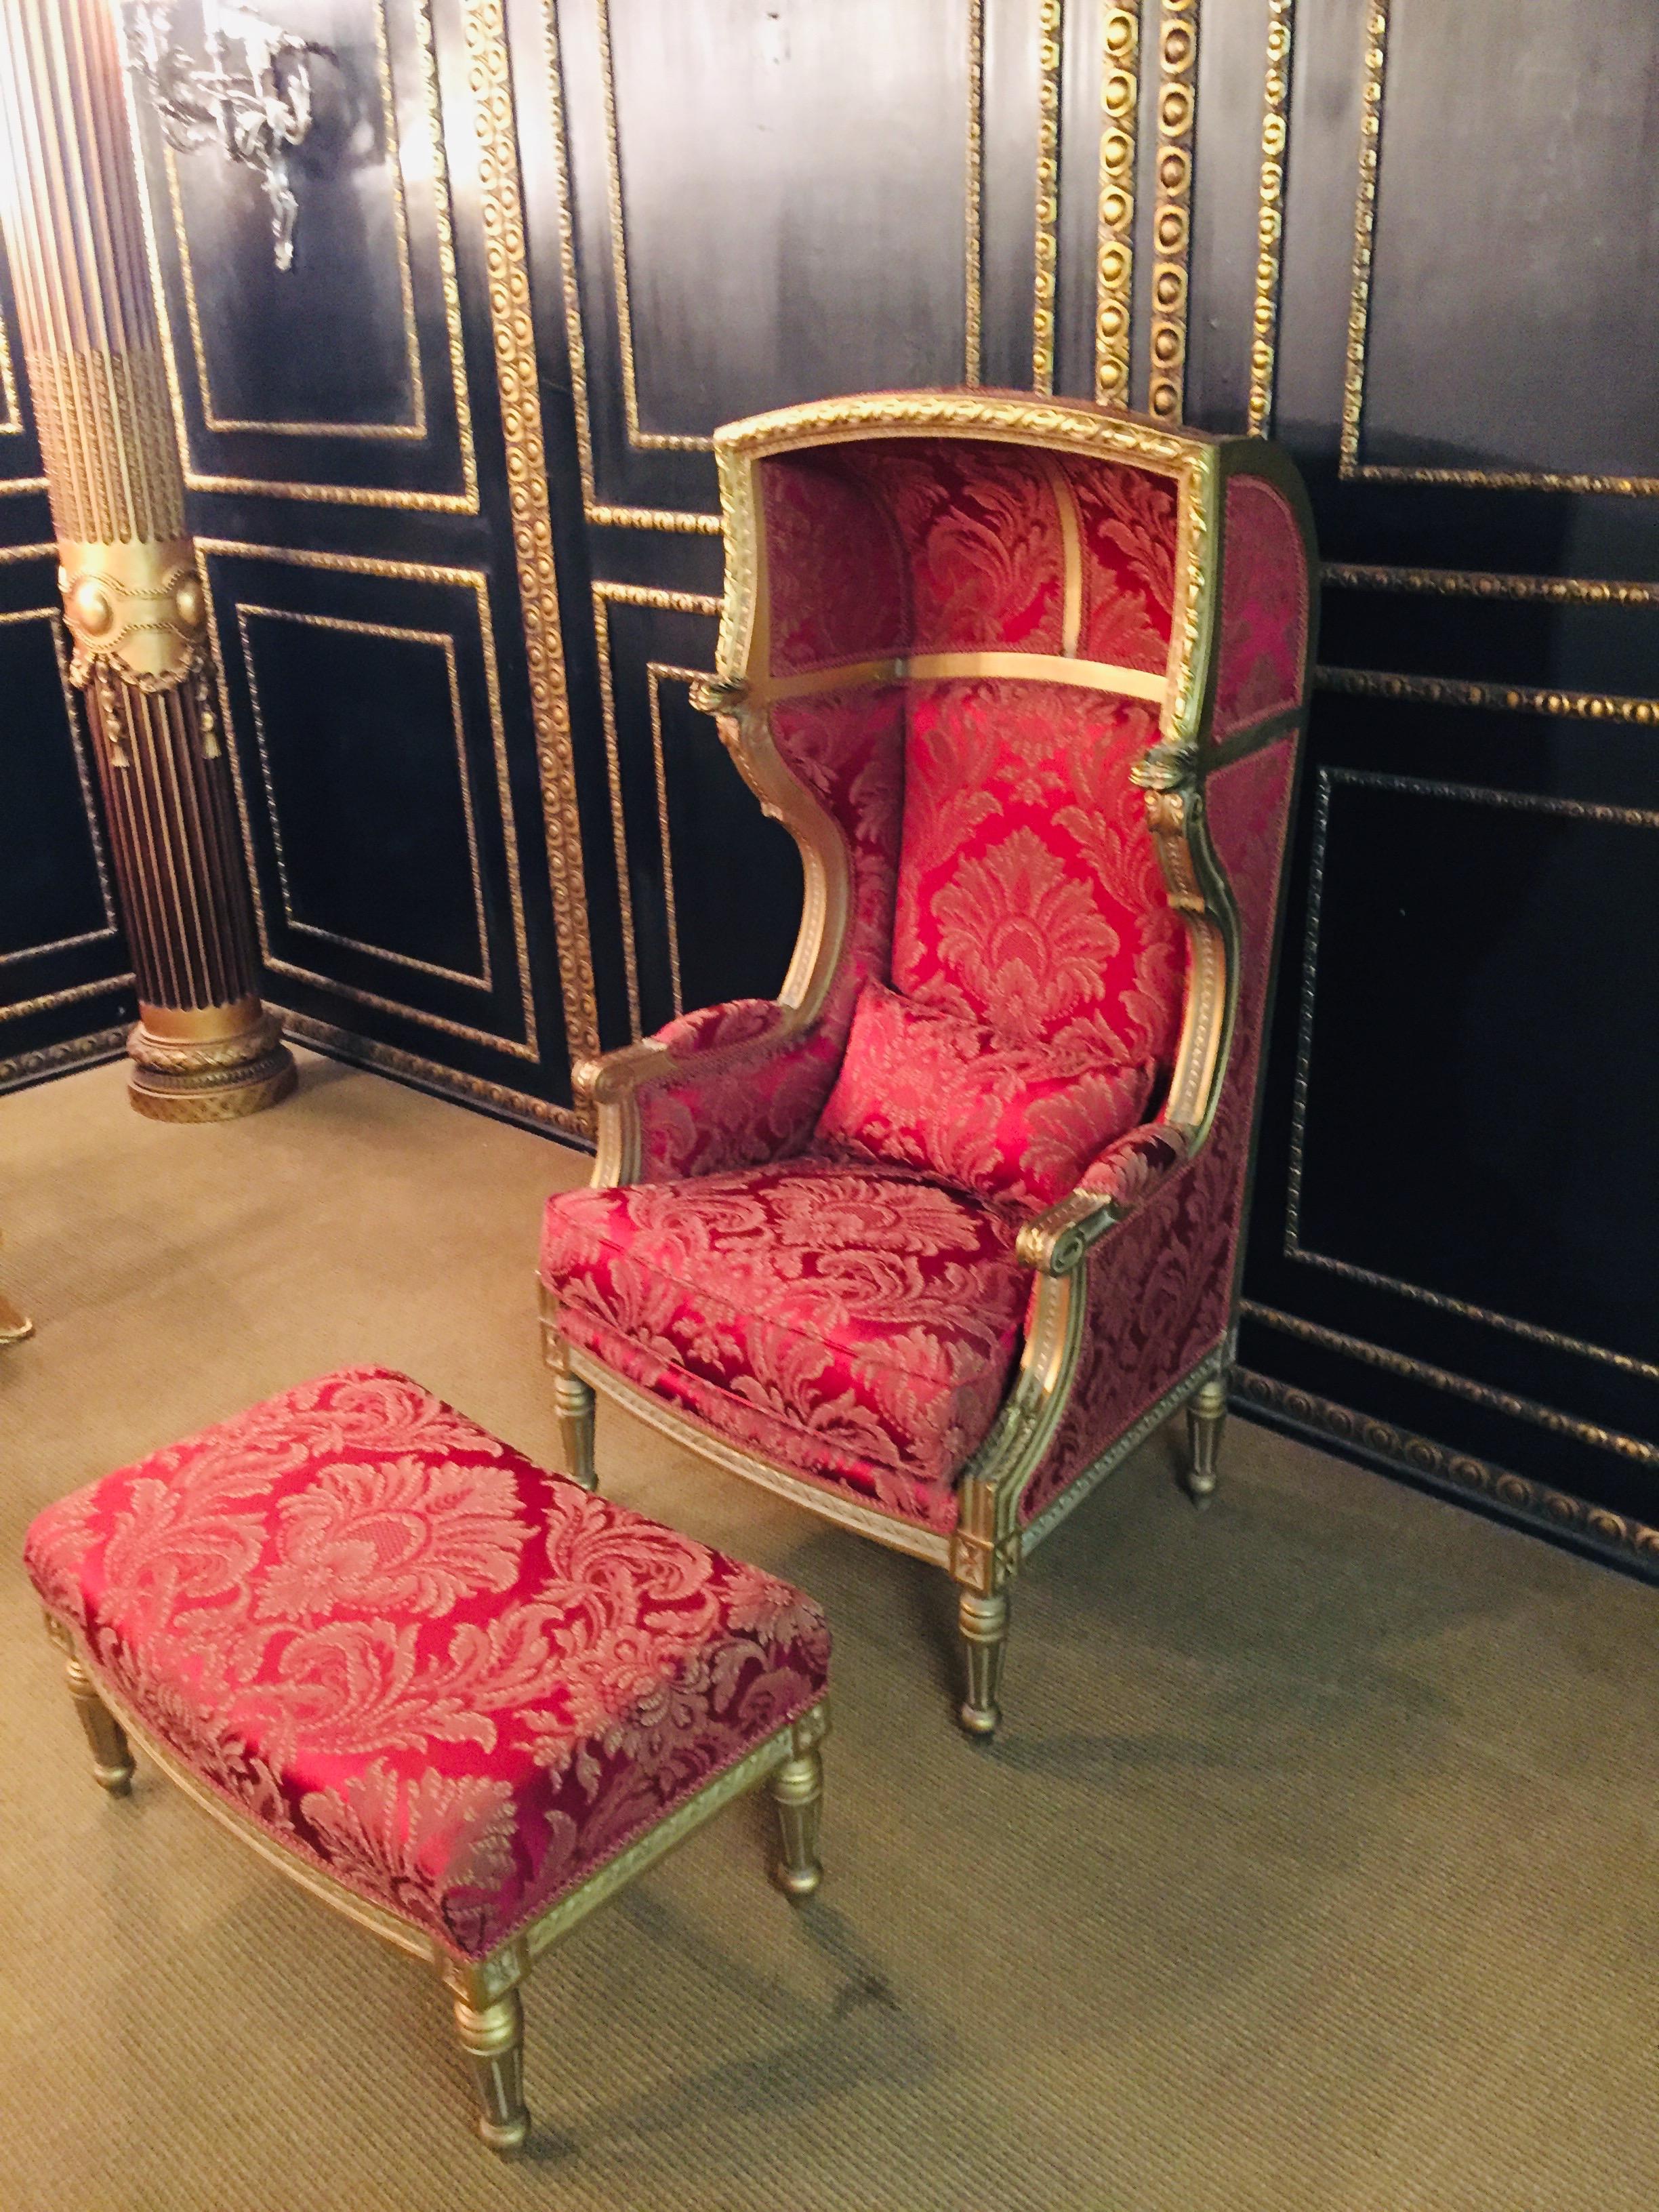 Hand-Crafted Bergere / Armchair with Stool in the Antique Style of Louis XVI